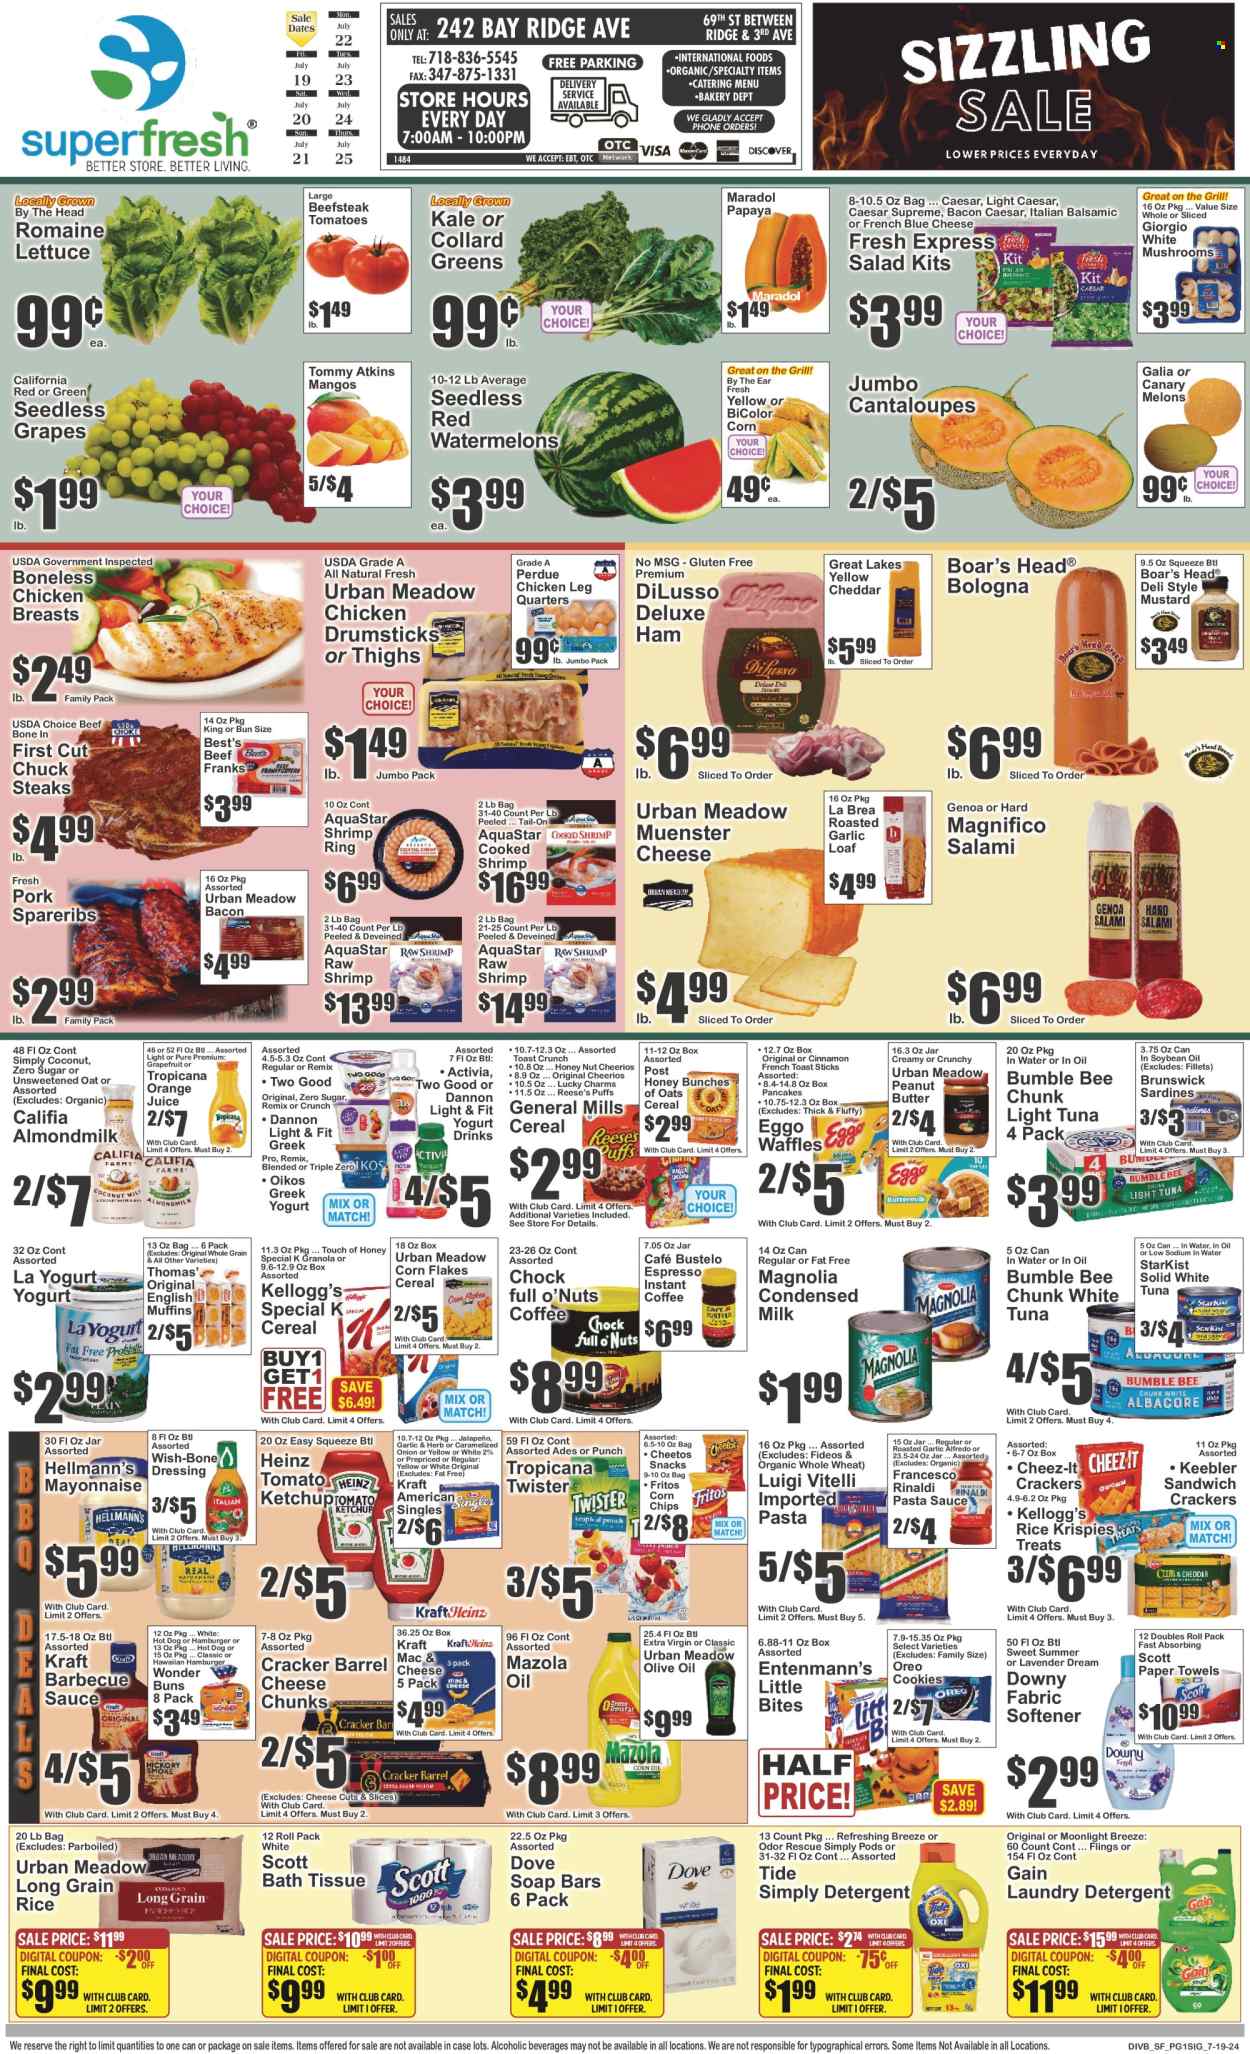 thumbnail - Super Fresh Flyer - 07/19/2024 - 07/25/2024 - Sales products - mushrooms, english muffins, muffin, buns, puffs, waffles, Entenmann's, cantaloupe, collard greens, lettuce, salad, romaine lettuce, grapefruits, grapes, seedless grapes, watermelon, papaya, melons, sardines, tuna, seafood, shrimps, StarKist, mac and cheese, hot dog, pasta sauce, snack, Bumble Bee, pancakes, Perdue®, Kraft®, spaghetti sauce, Boar's Head, ready meal, french toast, salami, ham, chicken breasts, bologna sausage, frankfurters, sliced cheese, cheese, Münster cheese, Kraft Singles, greek yoghurt, Oreo, yoghurt, Activia, Oikos, Dannon, almond milk, condensed milk, yoghurt drink, plant-based milk, mayonnaise, Hellmann’s, Dove, Reese's, cookies, Kellogg's, Little Bites, Keebler, General Mills, Fritos, Cheetos, chips, corn chips, Cheez-It, salty snack, canned tuna, Heinz, light tuna, canned fish, cereals, granola, Cheerios, corn flakes, soybeans, long grain rice, BBQ sauce, mustard, ketchup, dressing, extra virgin olive oil, soya oil, olive oil, orange juice, Tropicana Twister, coffee, instant coffee, chicken legs, chicken thighs, chicken drumsticks, steak, beef bone, ribs, pork meat, pork ribs, pork spare ribs, bath tissue, Scott, kitchen towels, paper towels, detergent, Gain, Tide, fabric softener, laundry detergent, Downy Laundry. Page 1.